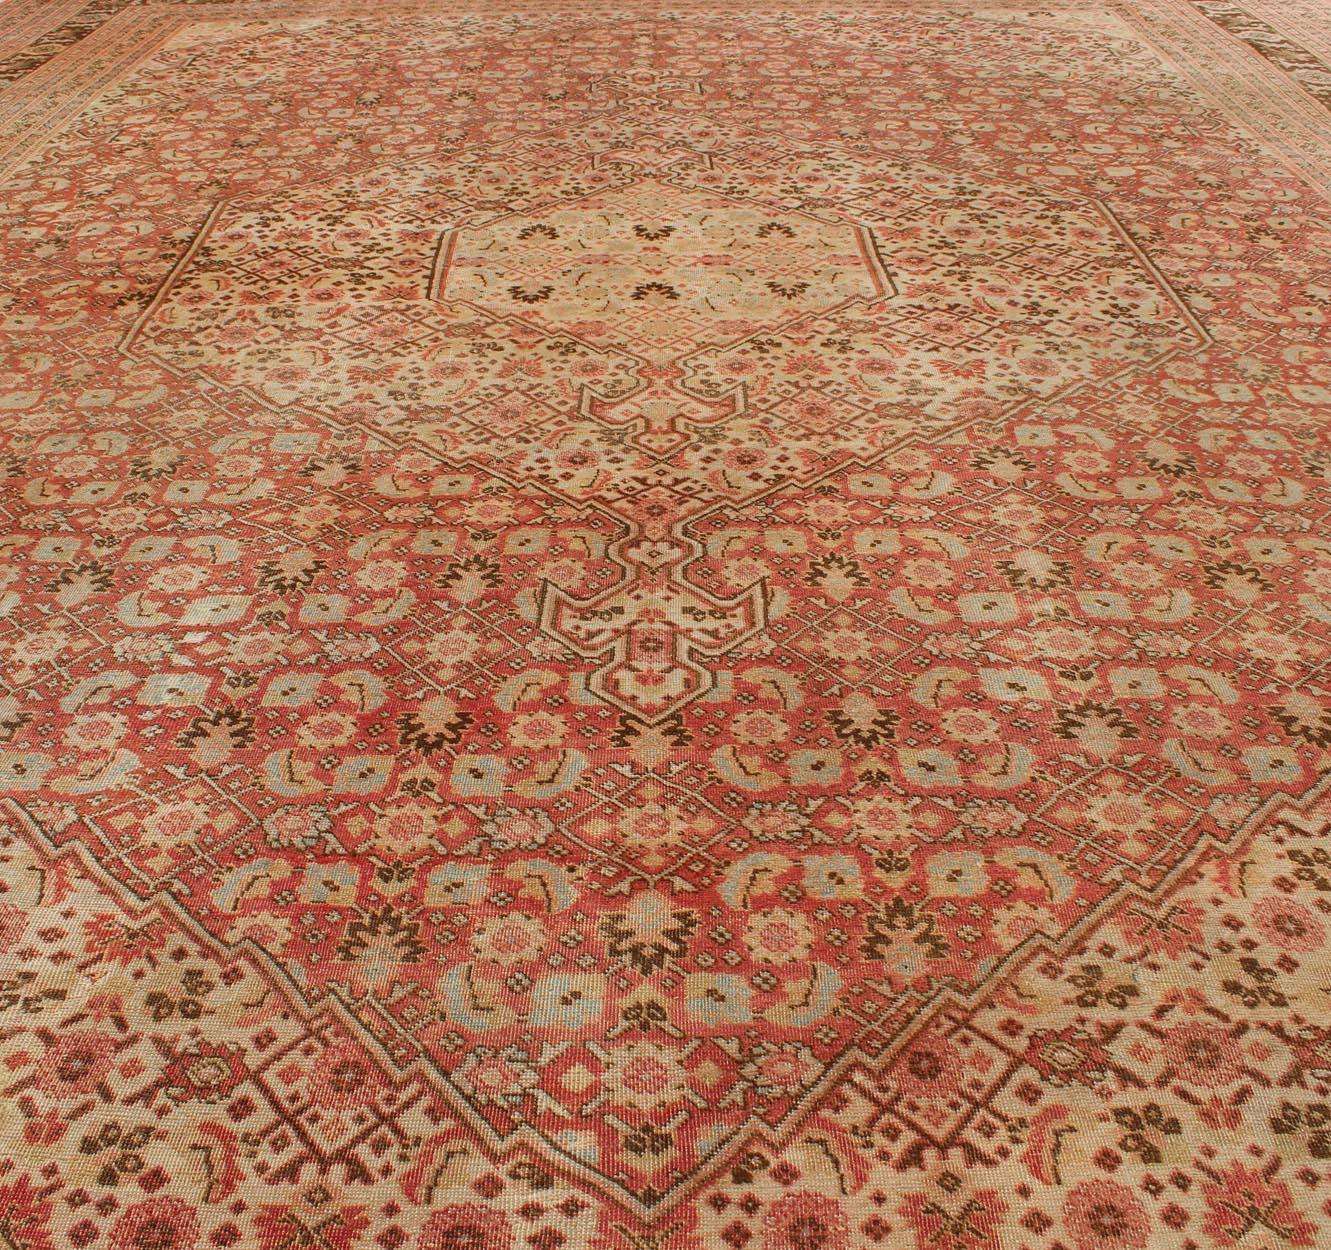 Antique Persian Tabriz Rug with Medallion Design in Coral, Cream and Brown Tones For Sale 5